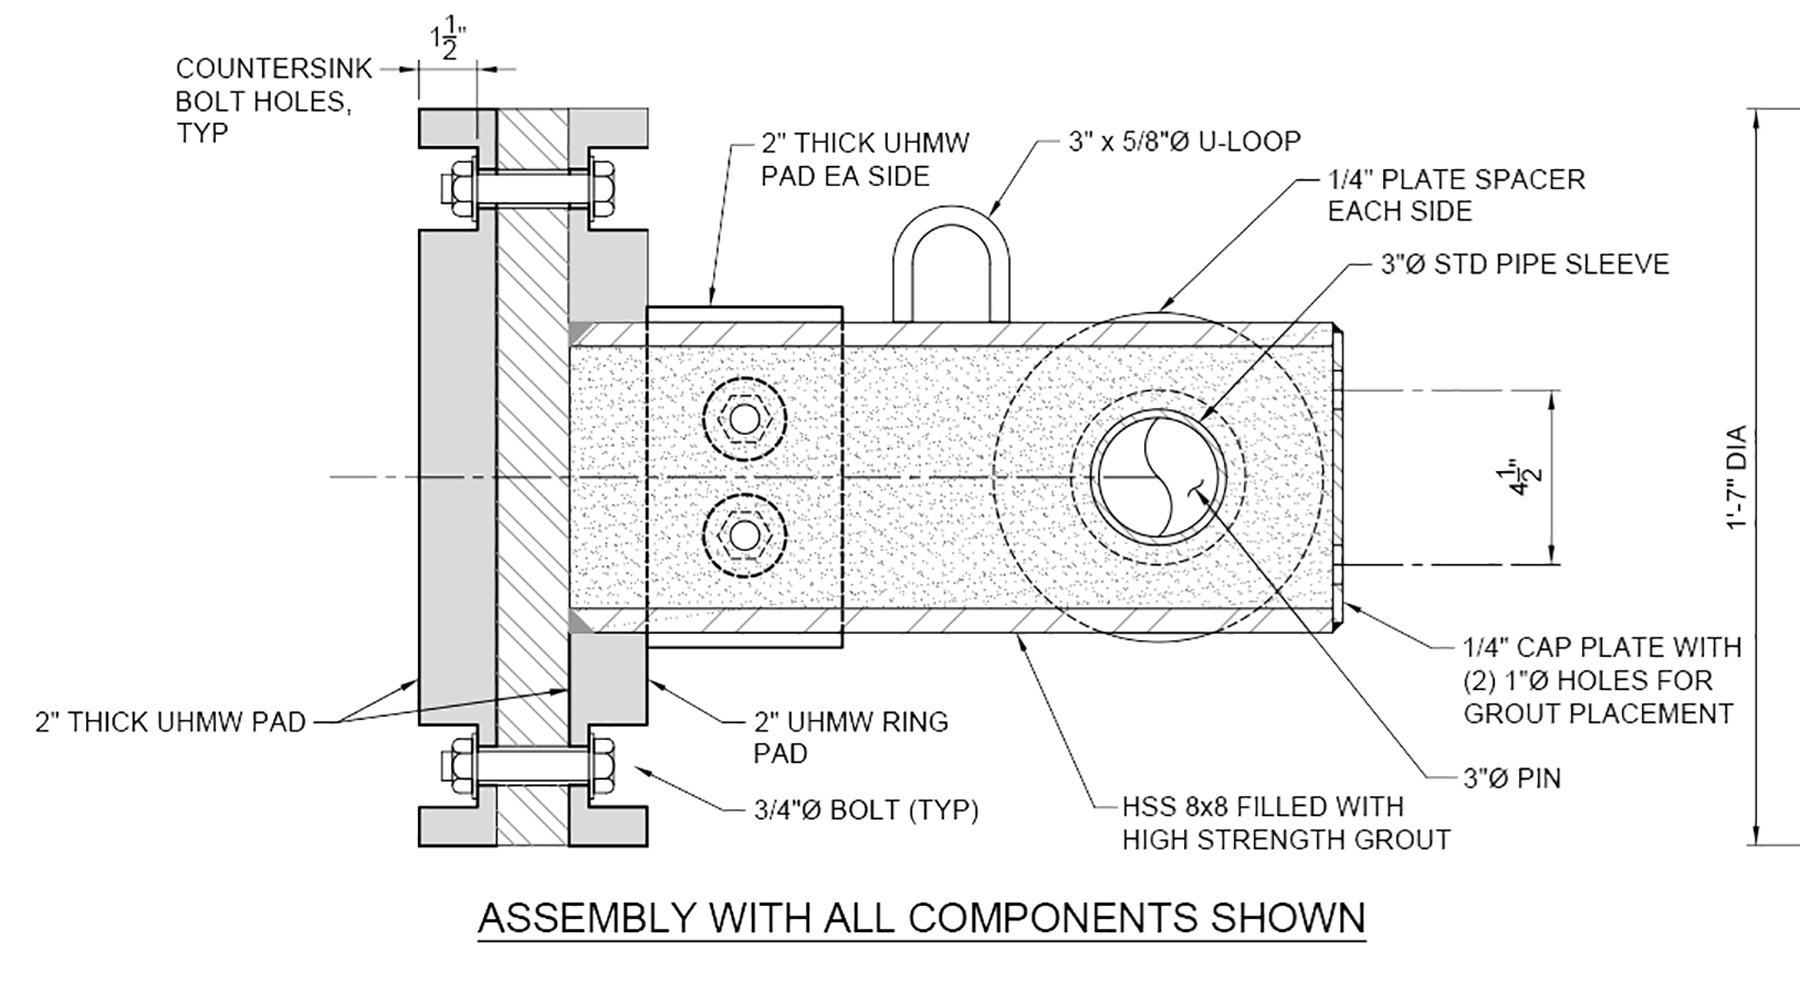 Image shows the various parts of a gripper guide connector assembly 